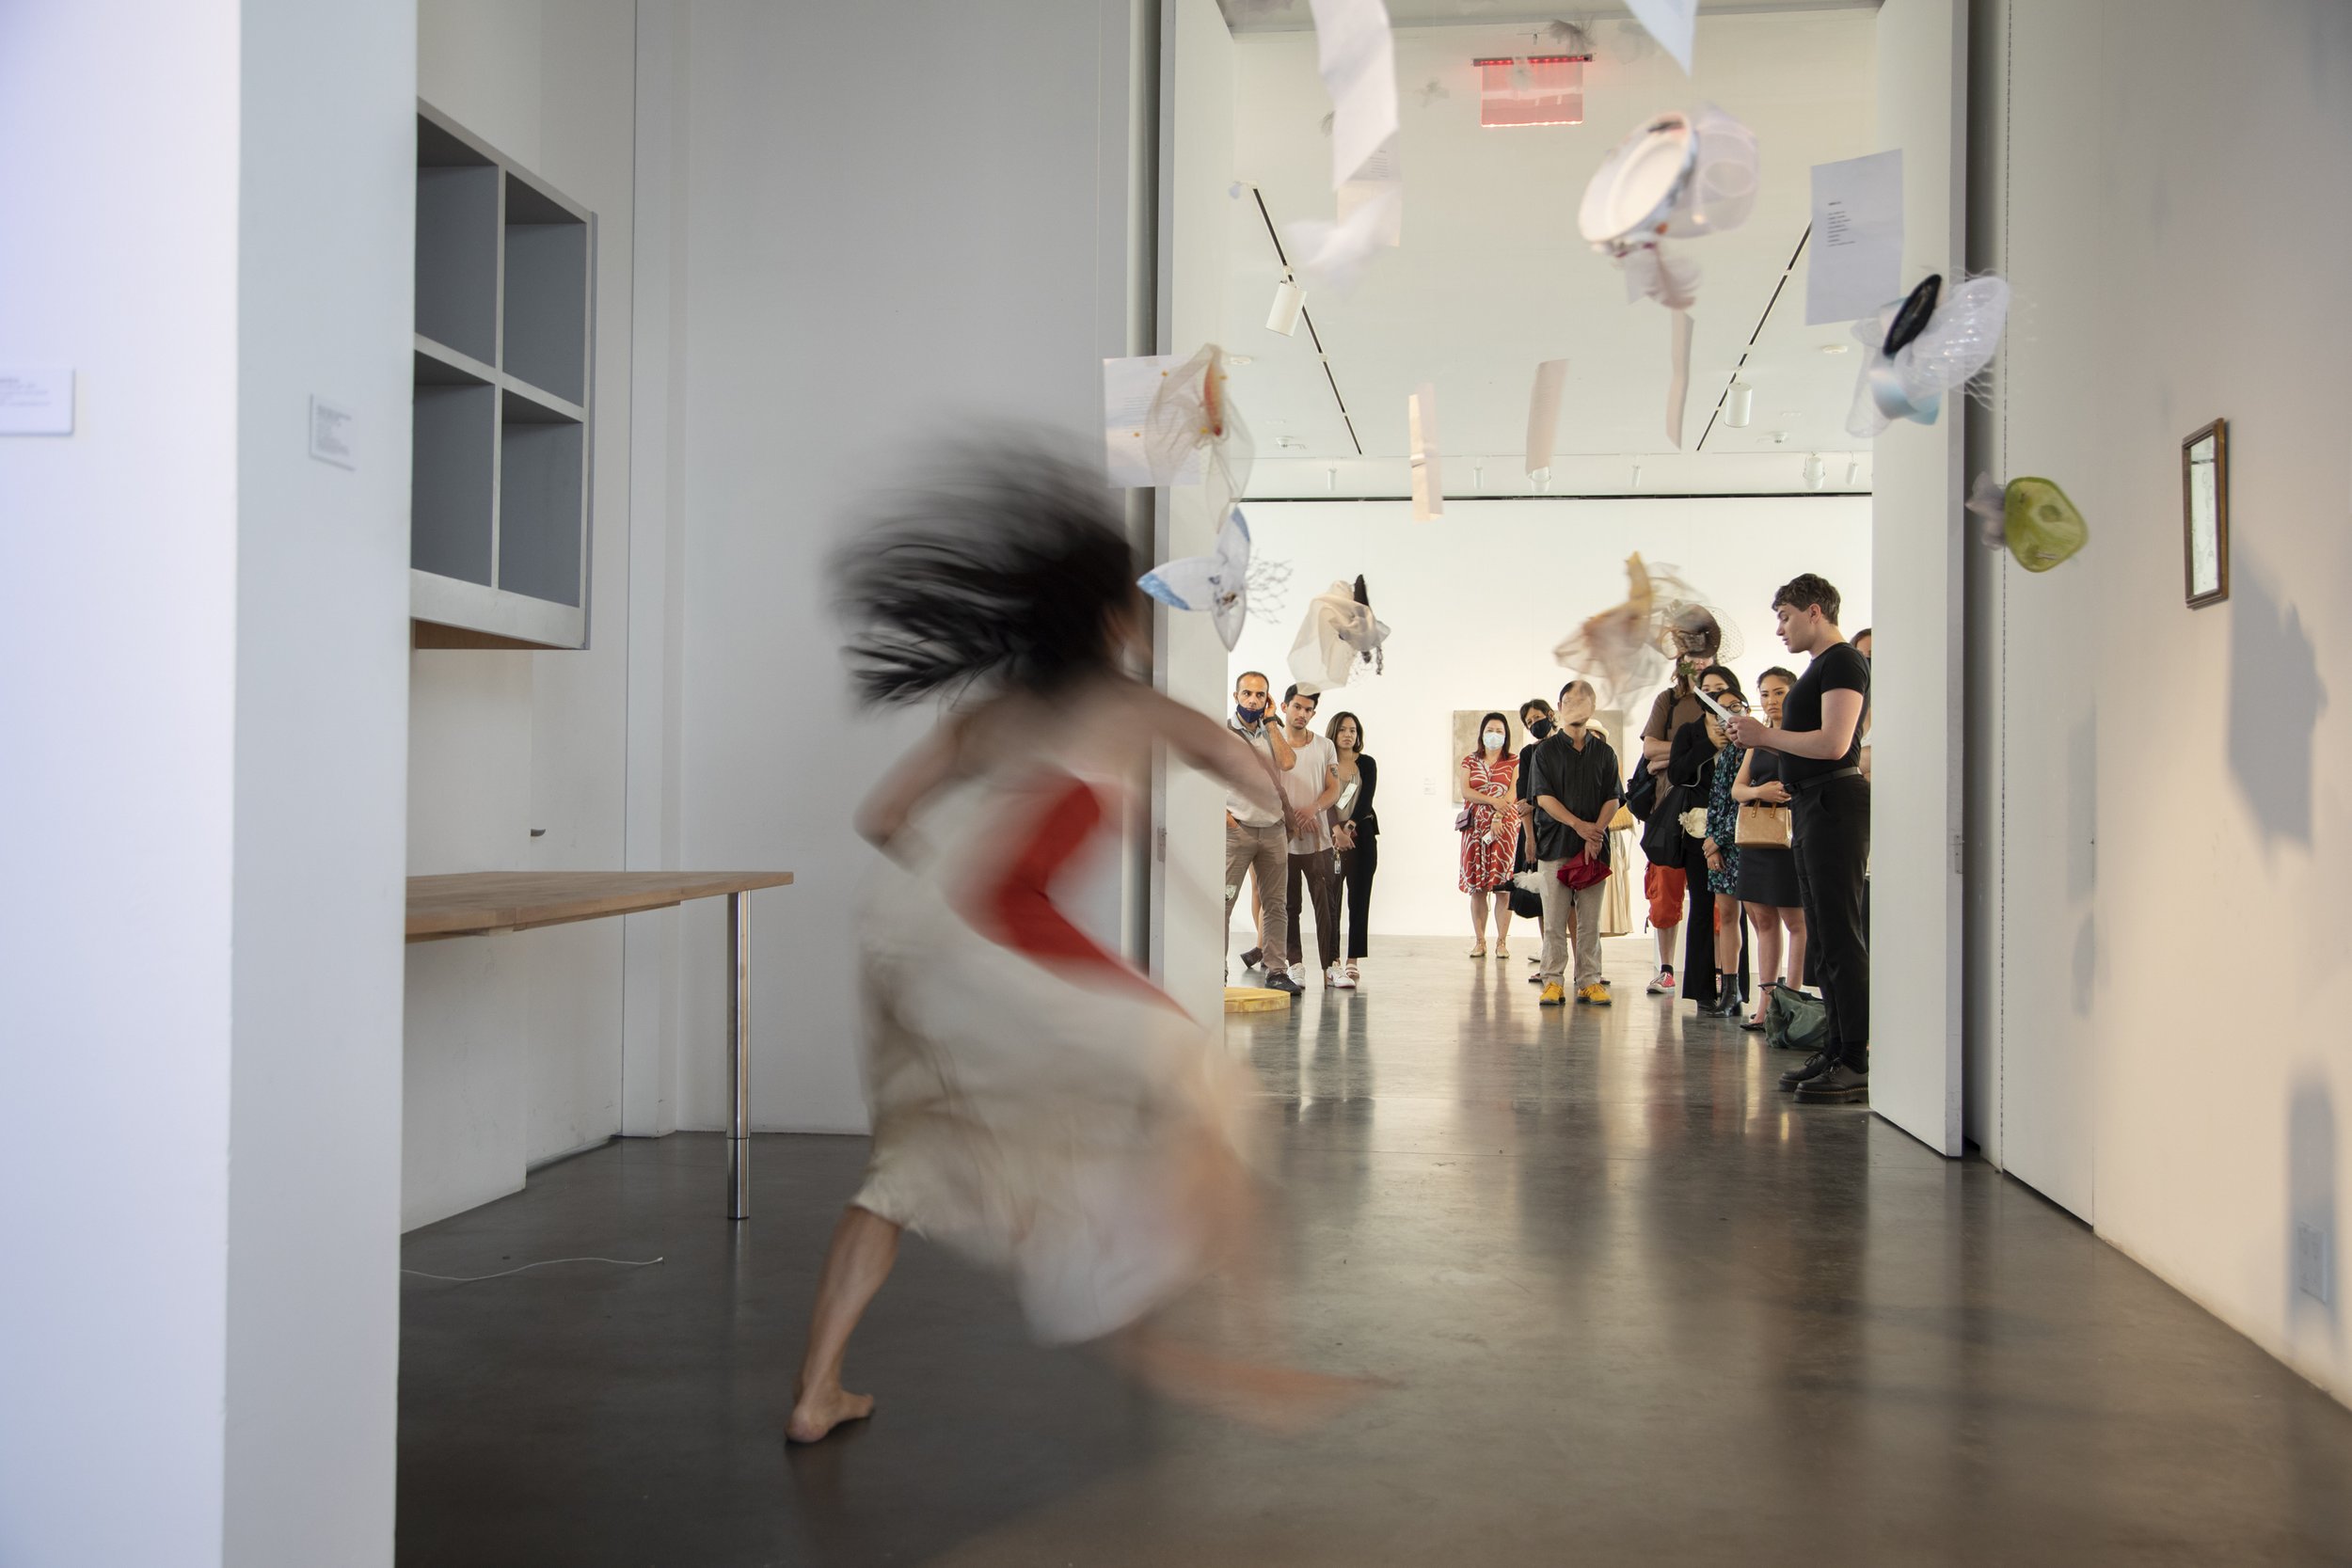  Ching-I Chang at  How Forests Dream  performance,  Pace Gallery, Photograph by Rich Lee 